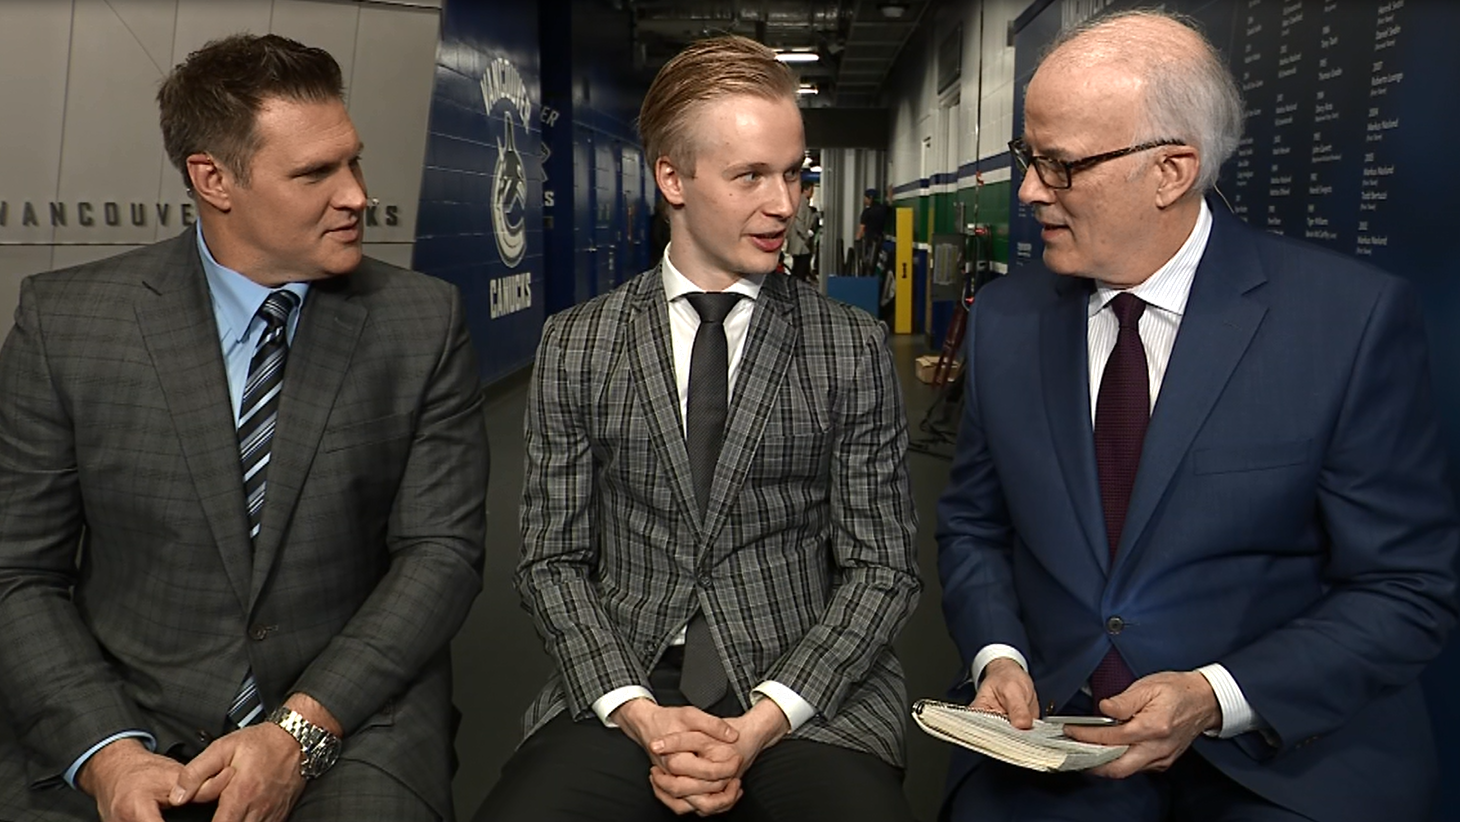 Surfin' With The Alien. Elias Pettersson On After Hours.